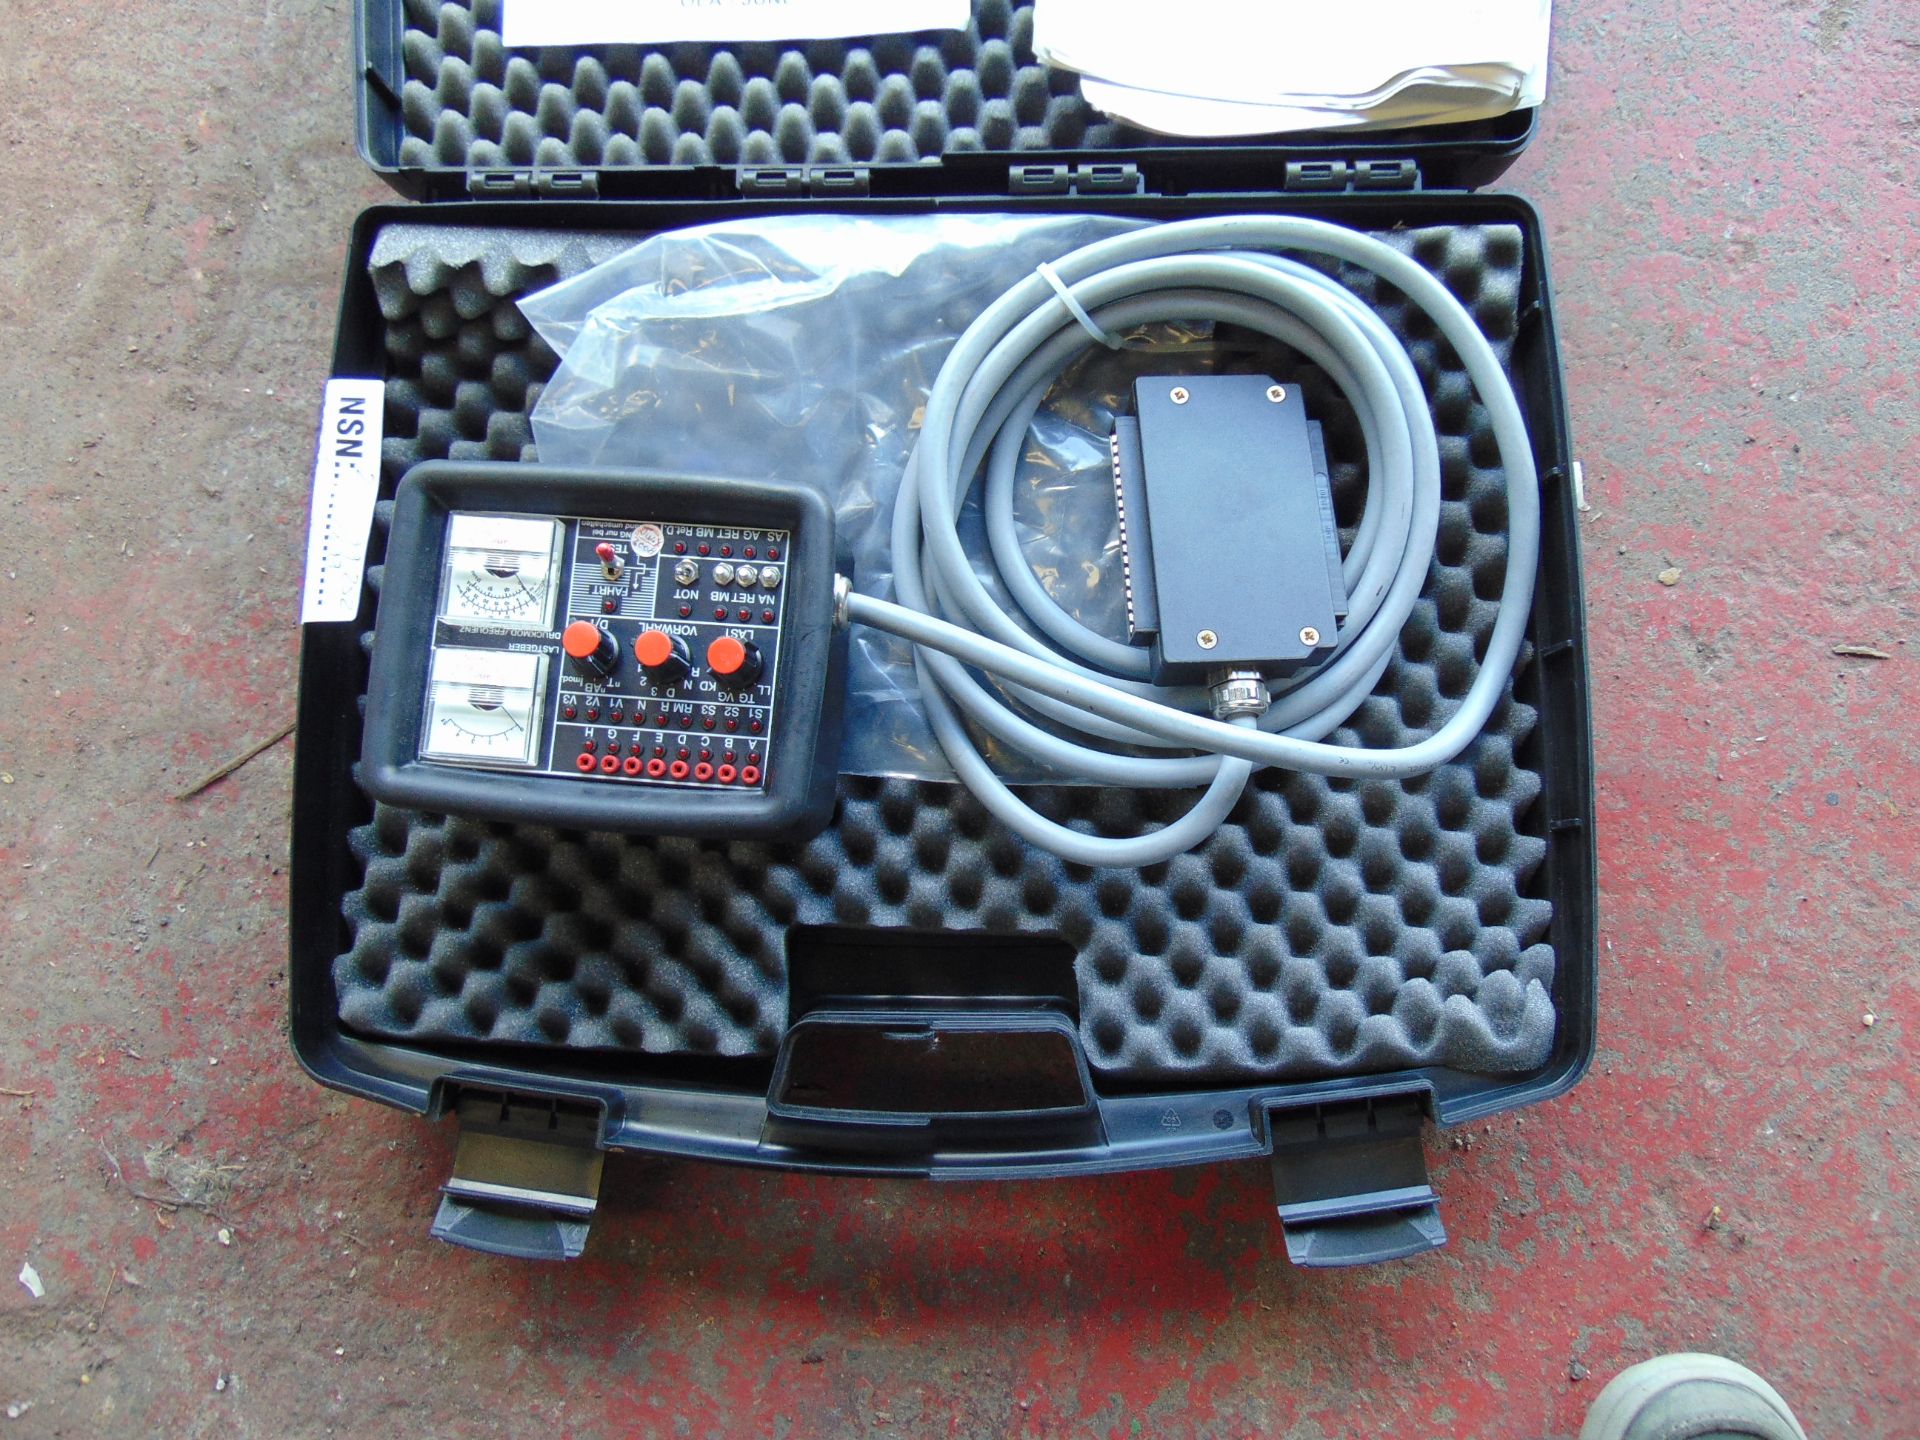 Leyland Daf Drops ZF Main Gearbox Diagnostic Tester c/w Manuals in original transit case - Image 2 of 3